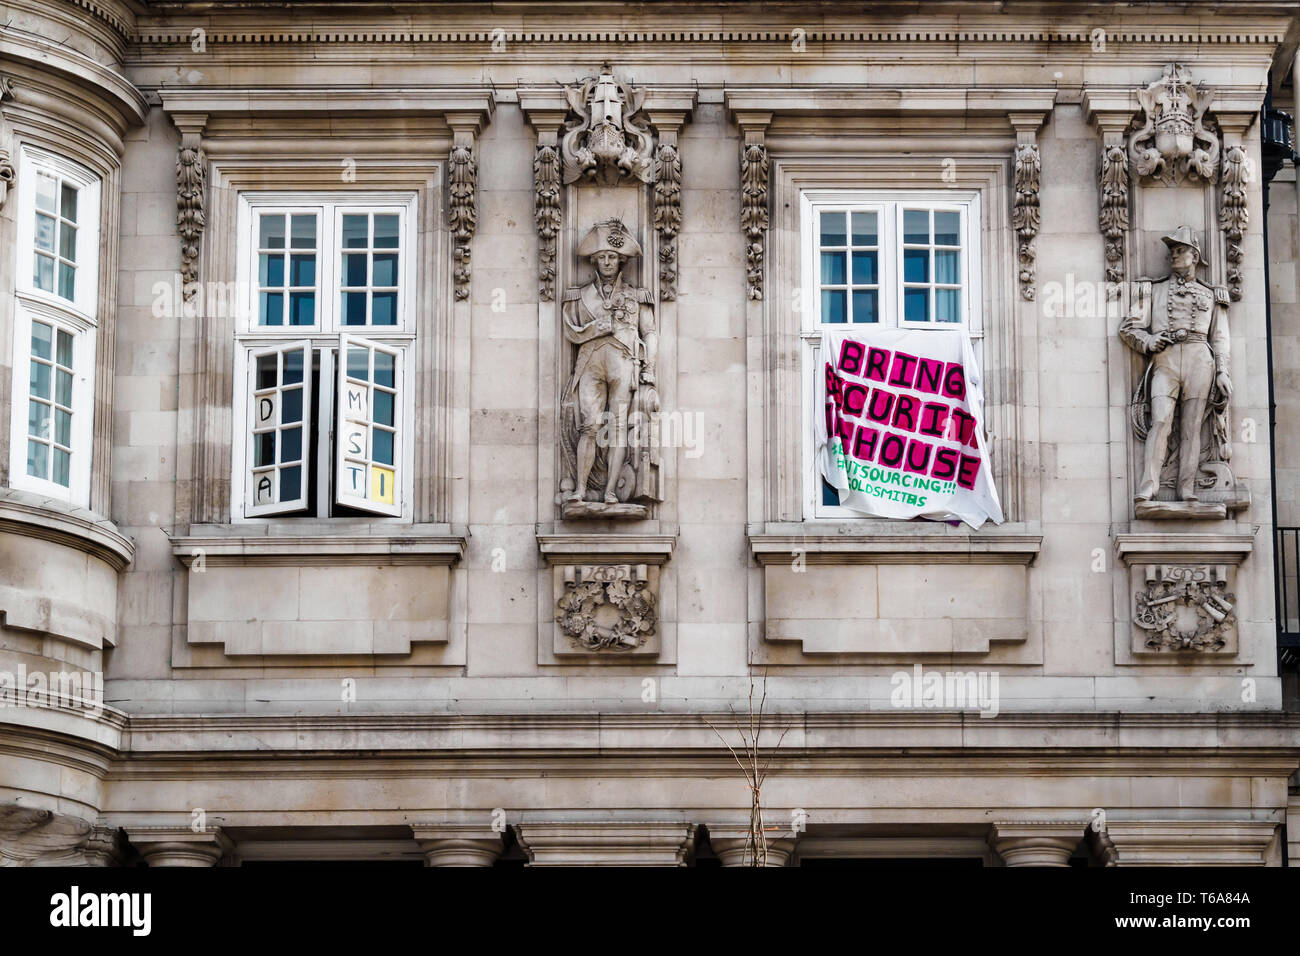 London, UK. 30th April 2018. Goldsmiths Anti-Racist Action celebrate 50 days of occupation of the management building, the former Deptford Town Hall. The occupation began when the university failed to respond adequately to racist abuse of a candidate in the student elections. Students claim the university fails to treat BAME students and workers fairly, and among other demands insist Goldsmiths produces a strategic plan to tackle racism and bring service staff in-house. Credit: Peter Marshall/Alamy Live News Stock Photo